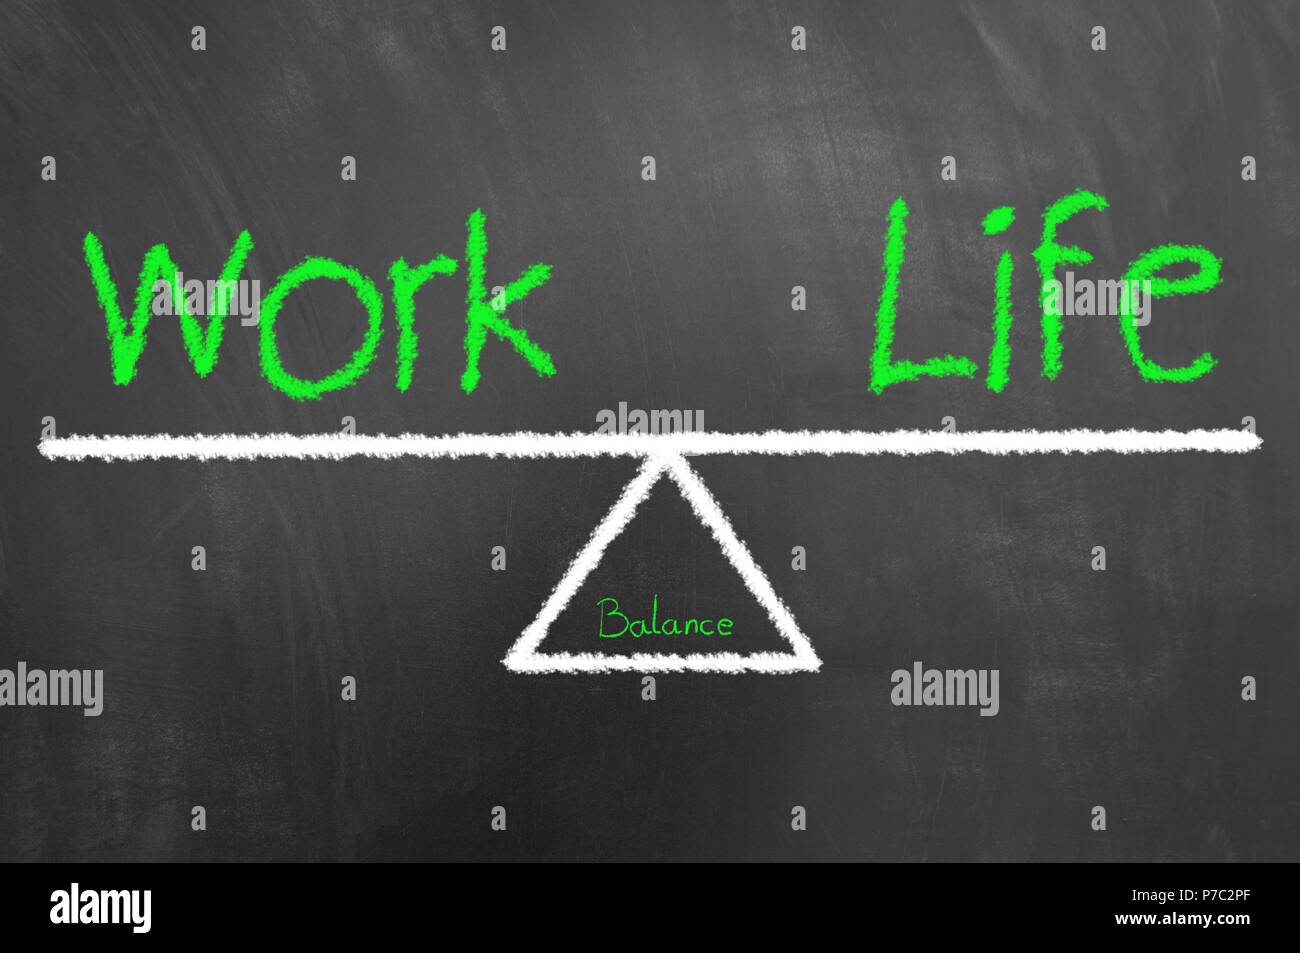 Work life balance green text and drawing on blackboard or chalkboard as healthy harmony lifestyle choice concept Stock Photo